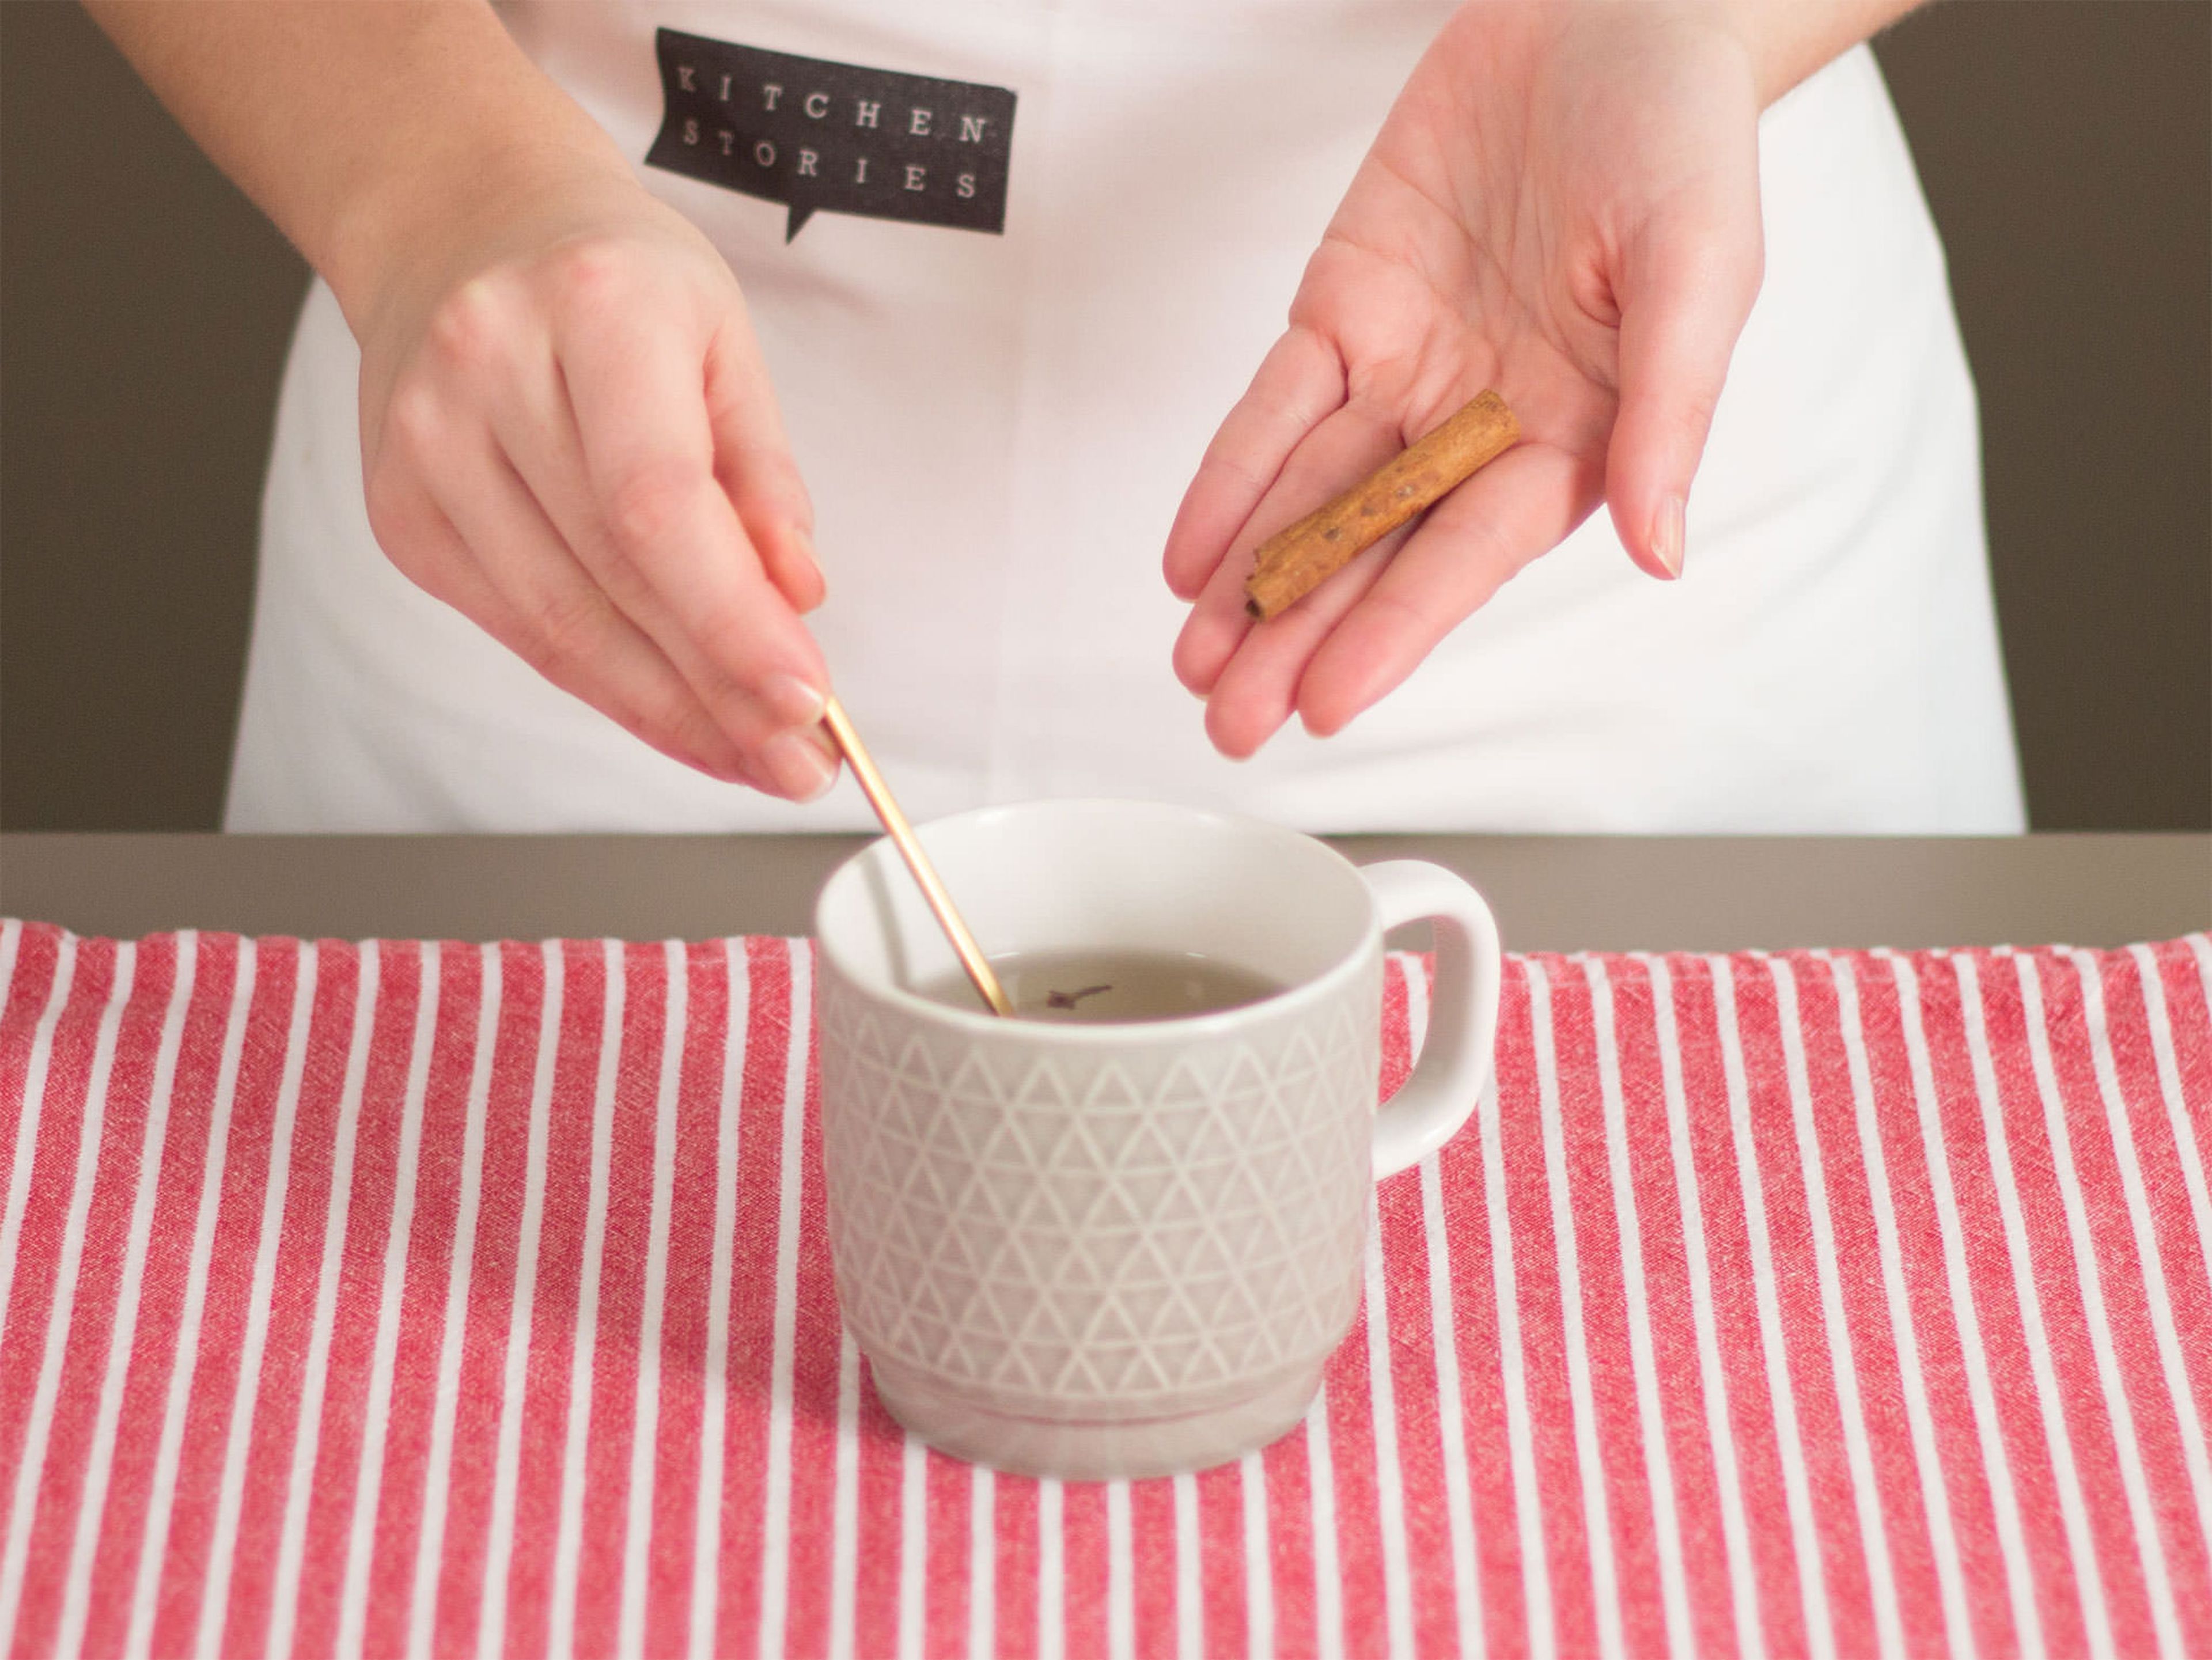 Pour hot water into a mug. Add honey, cloves, and cinnamon stick. Allow to cool for approx. 2 – 3 min.